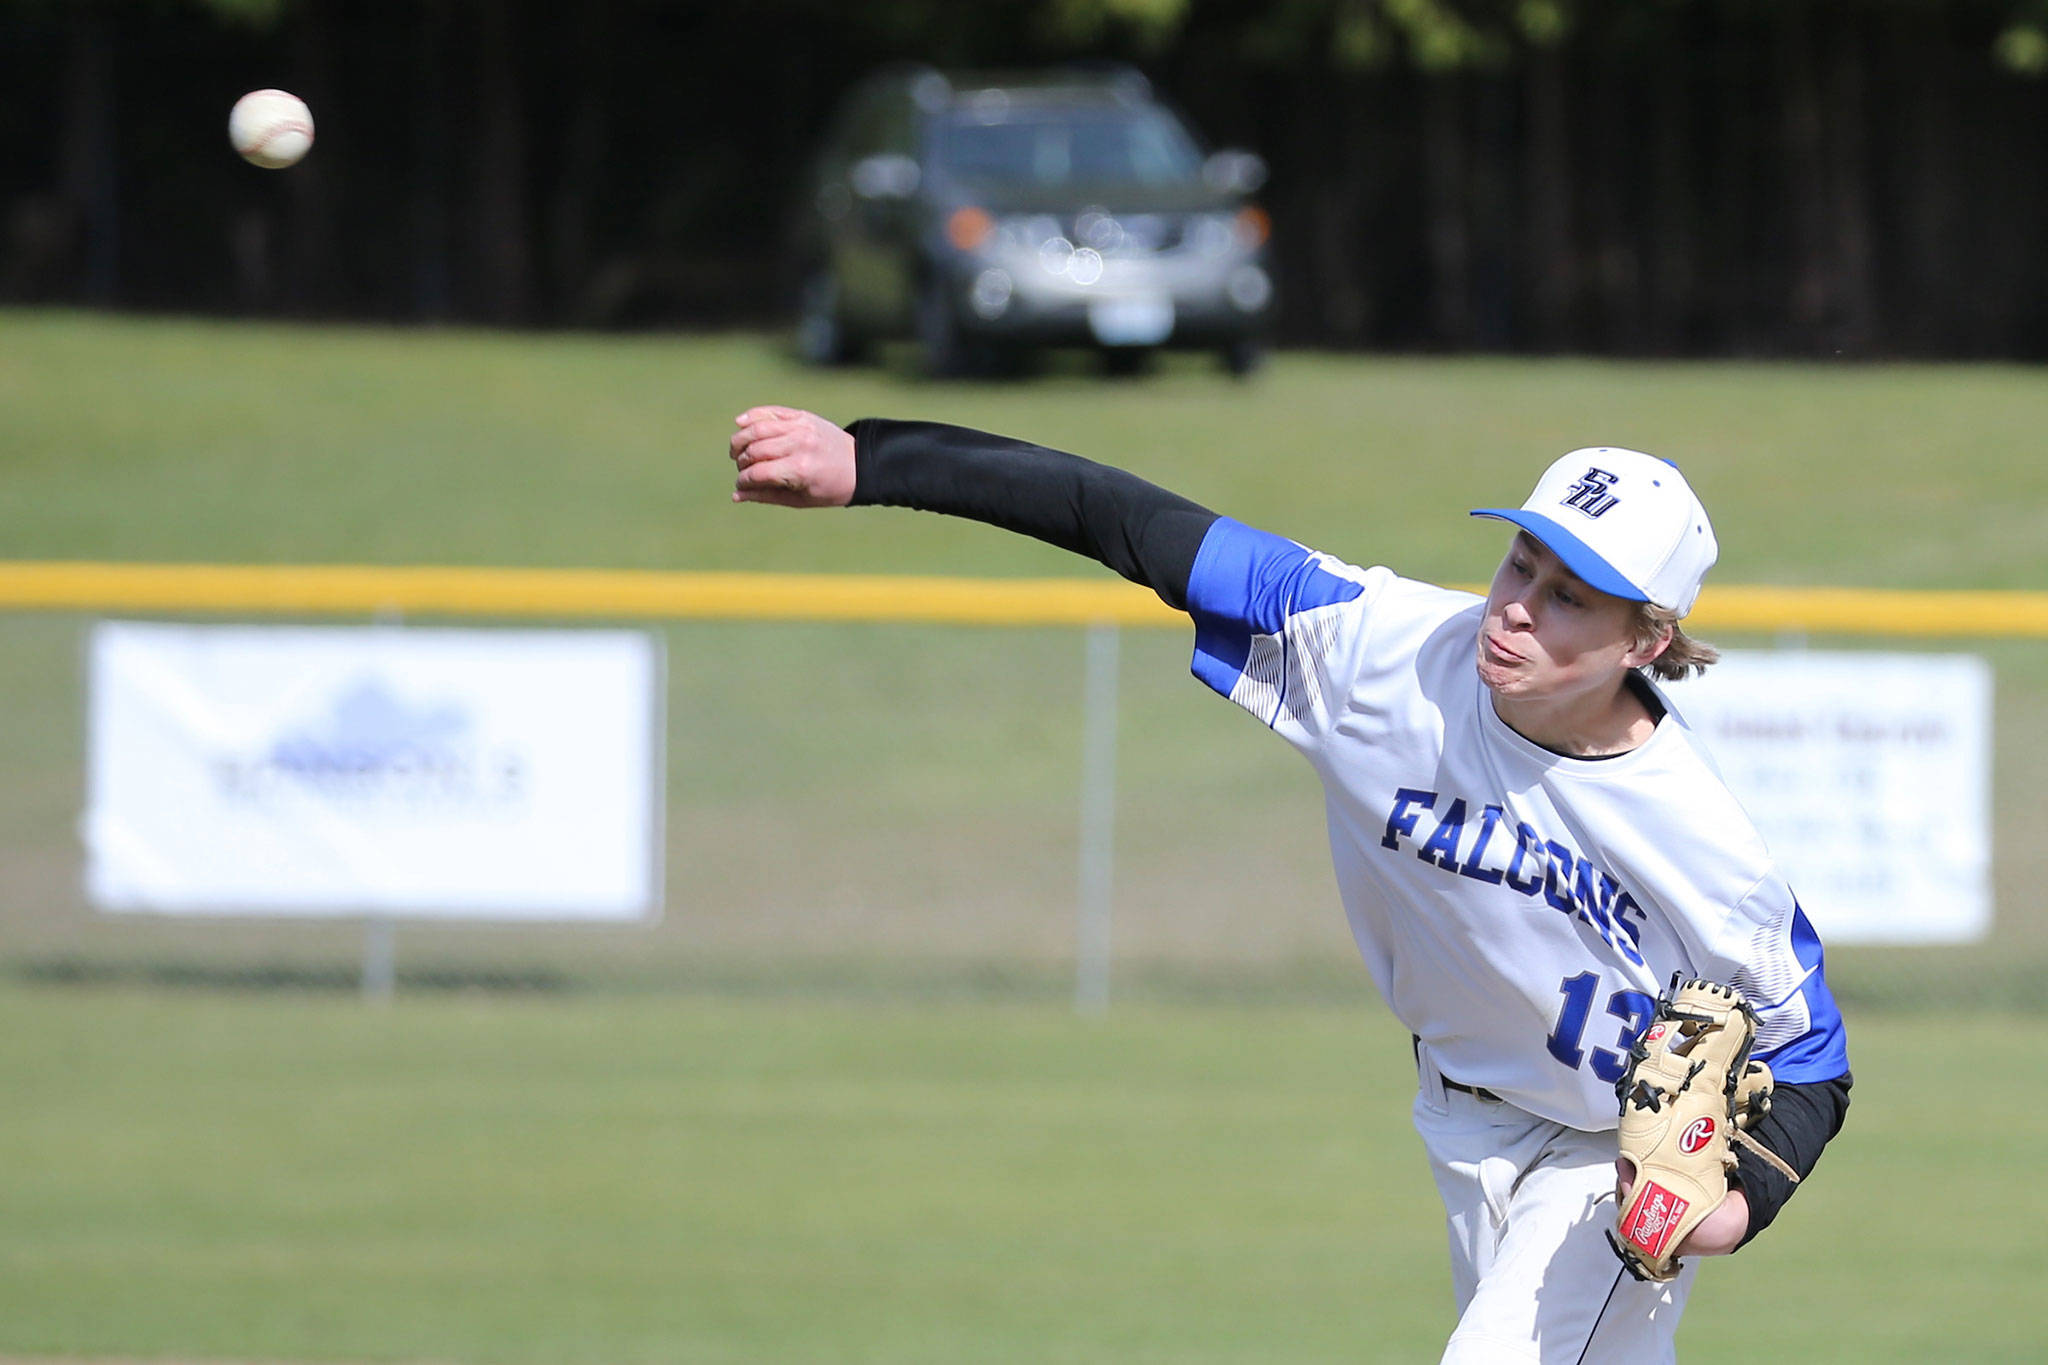 South Whidbey High School’s Drew Fry fires a pitch against Coupeville Saturday.(Photo by John Fisken)